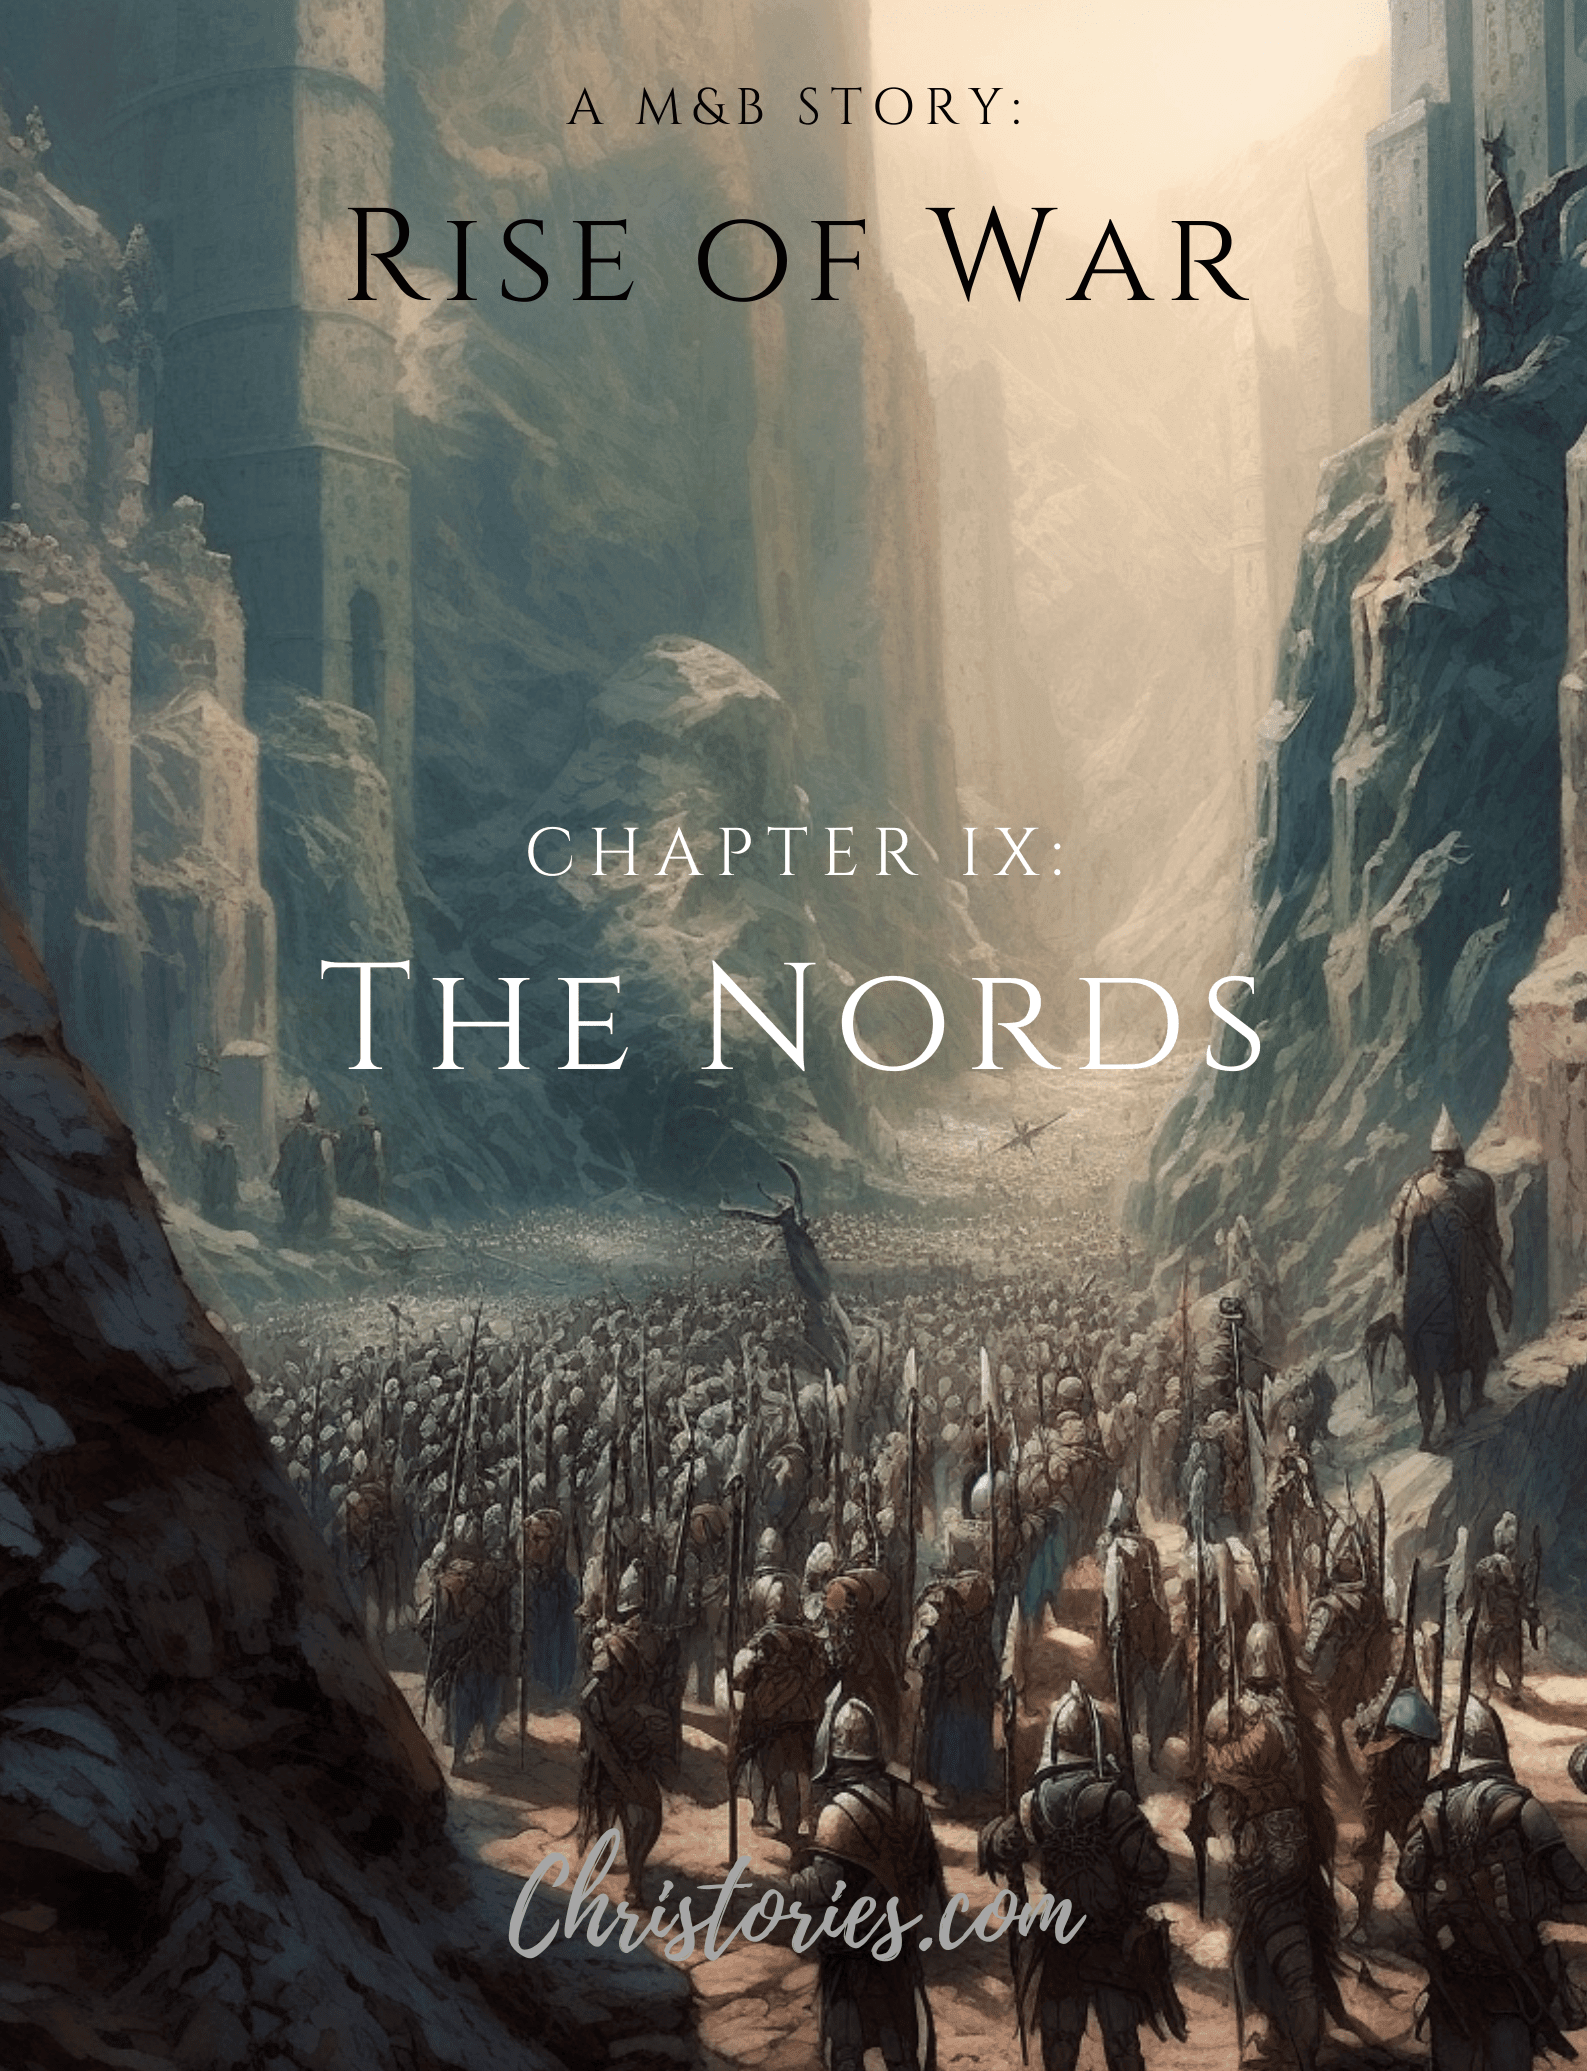 Mount And Blade: Rise of War, Chapter IX – The Nords